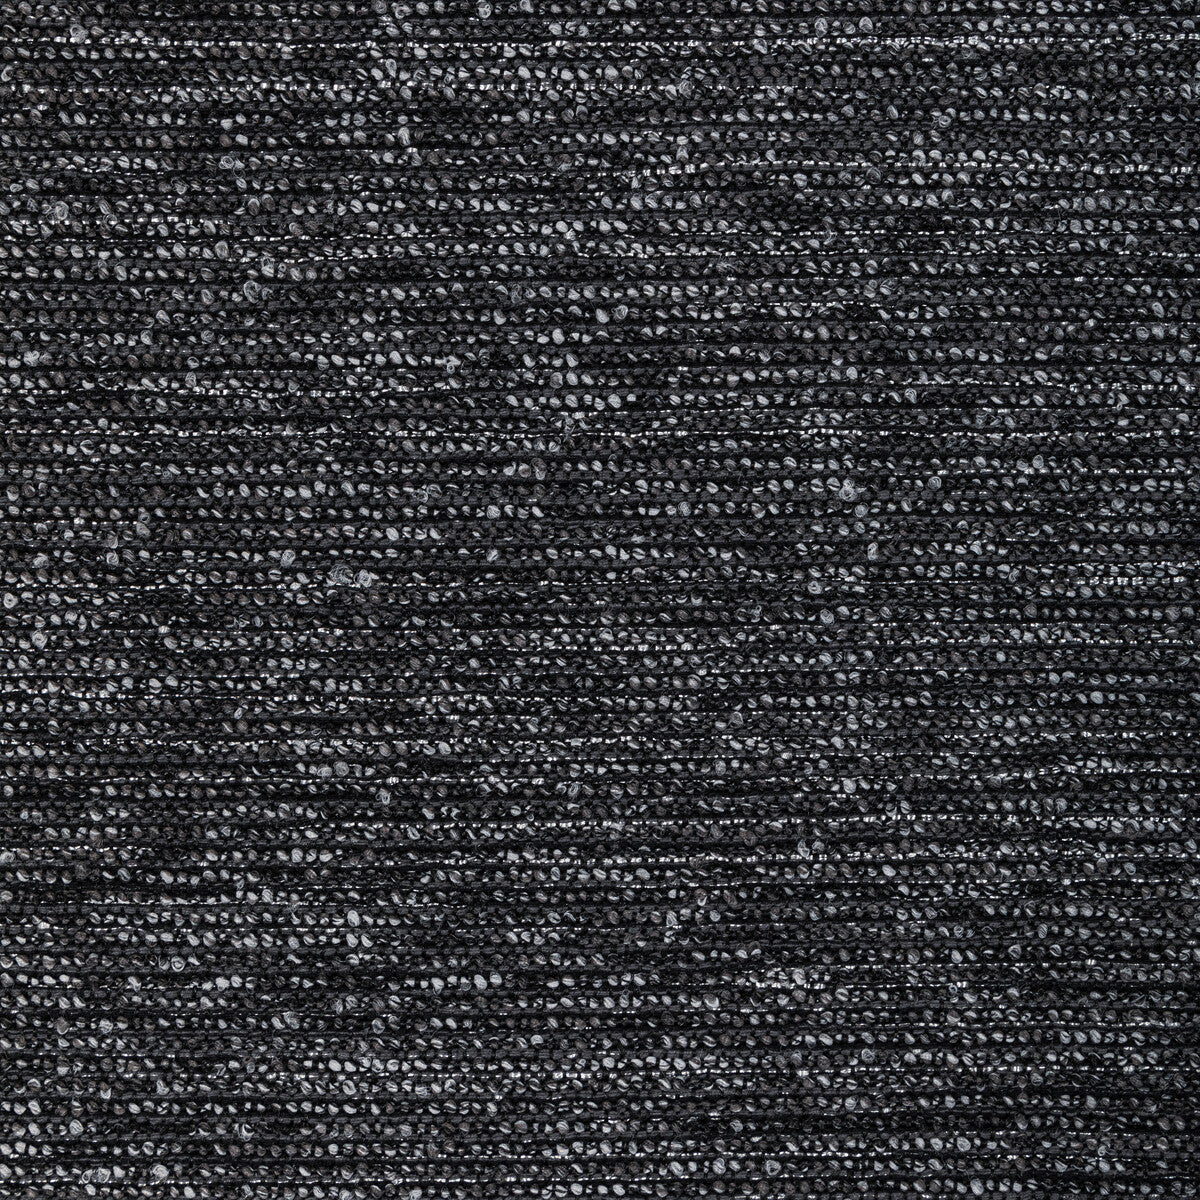 Uplift fabric in shimmer color - pattern 36565.8.0 - by Kravet Contract in the Seaqual collection